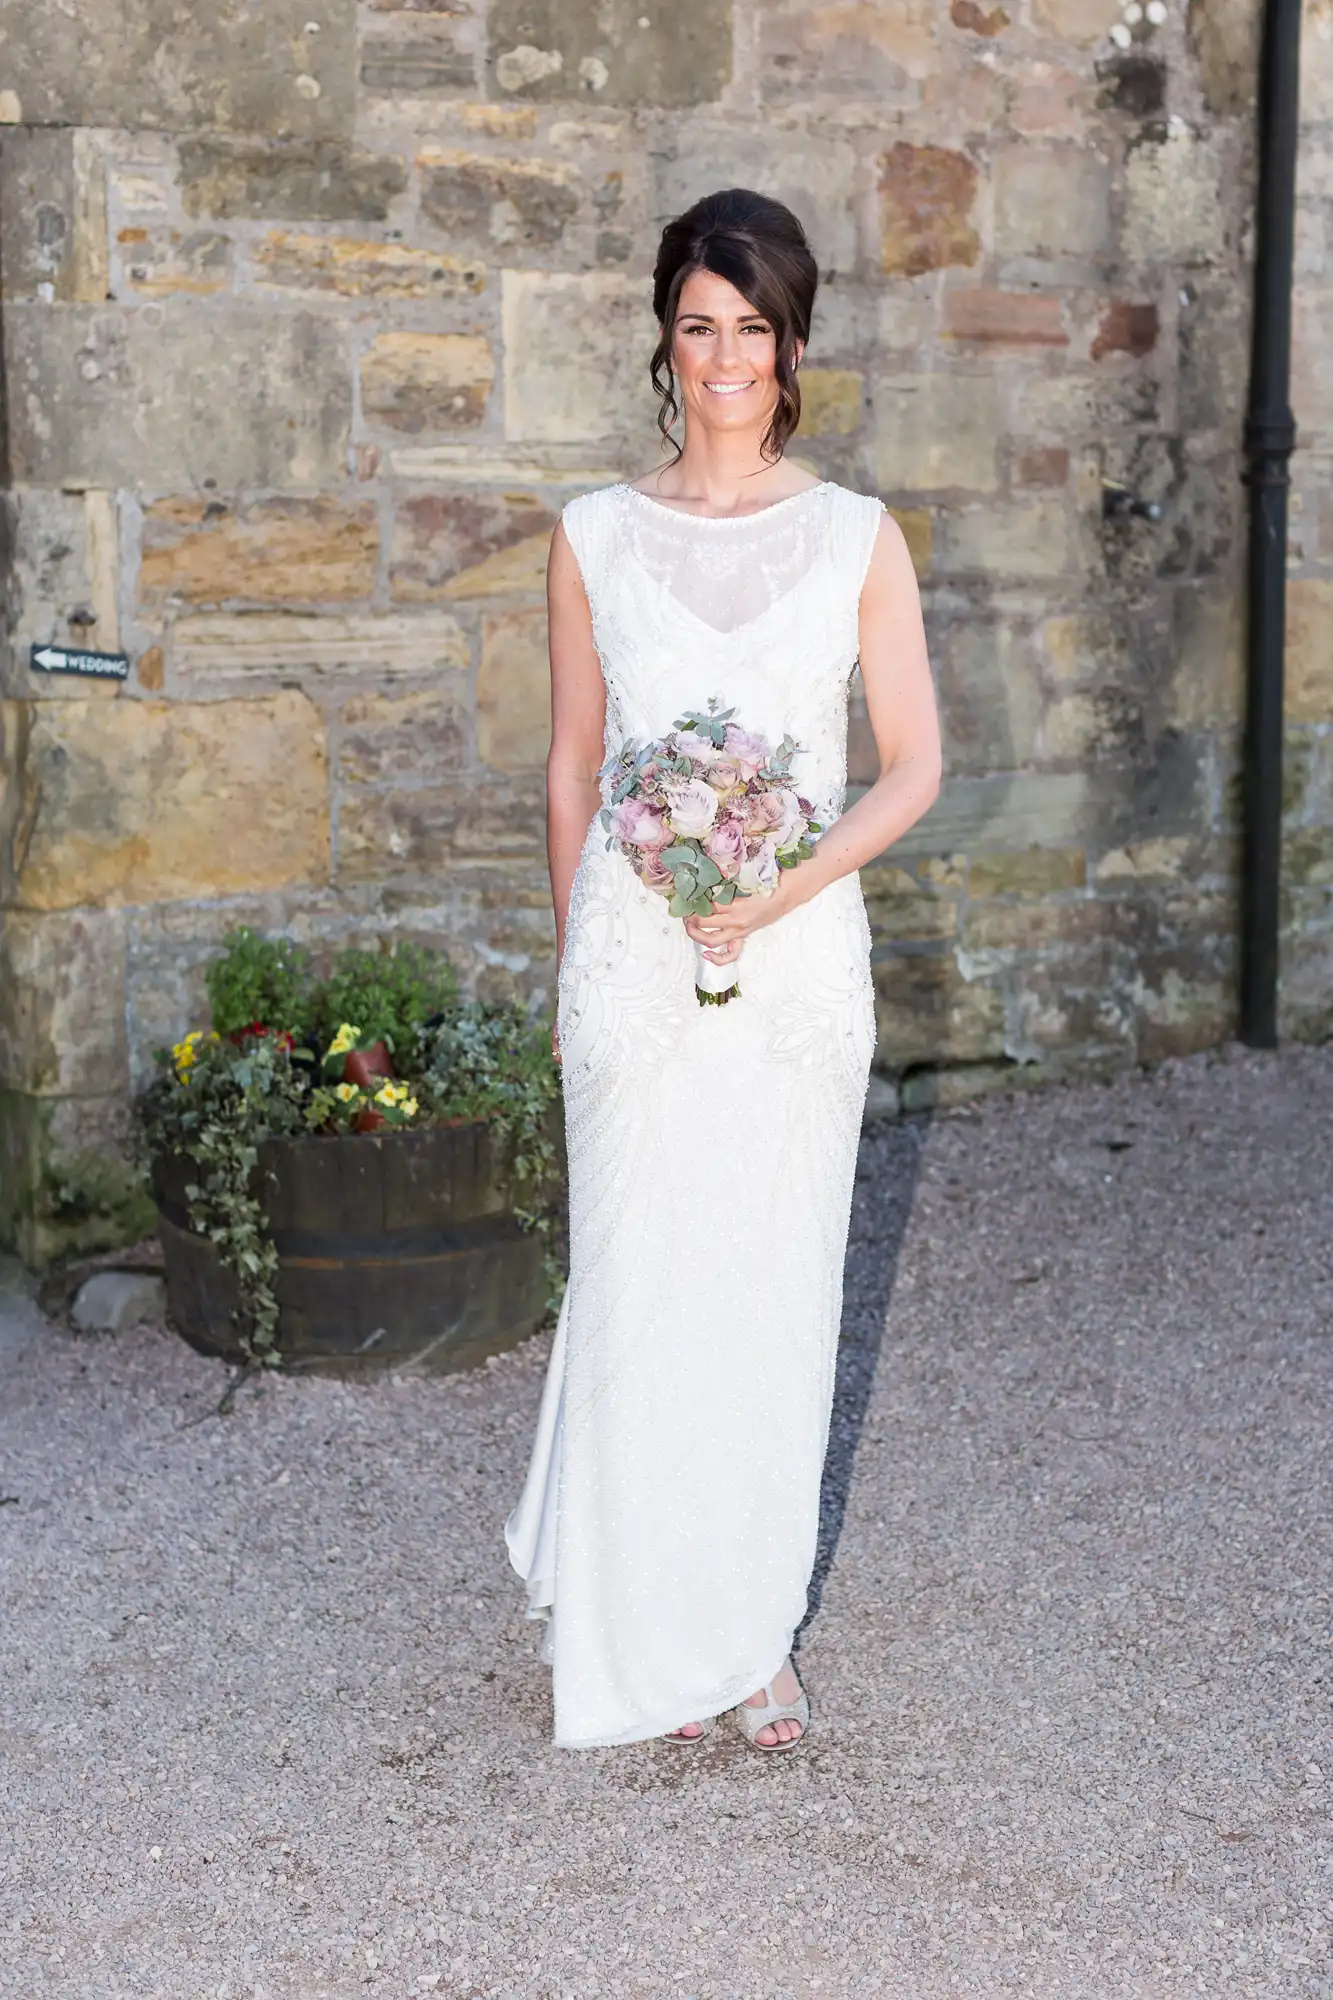 A bride in a white sleeveless gown smiling with a bouquet of flowers, standing outside in front of a stone building.